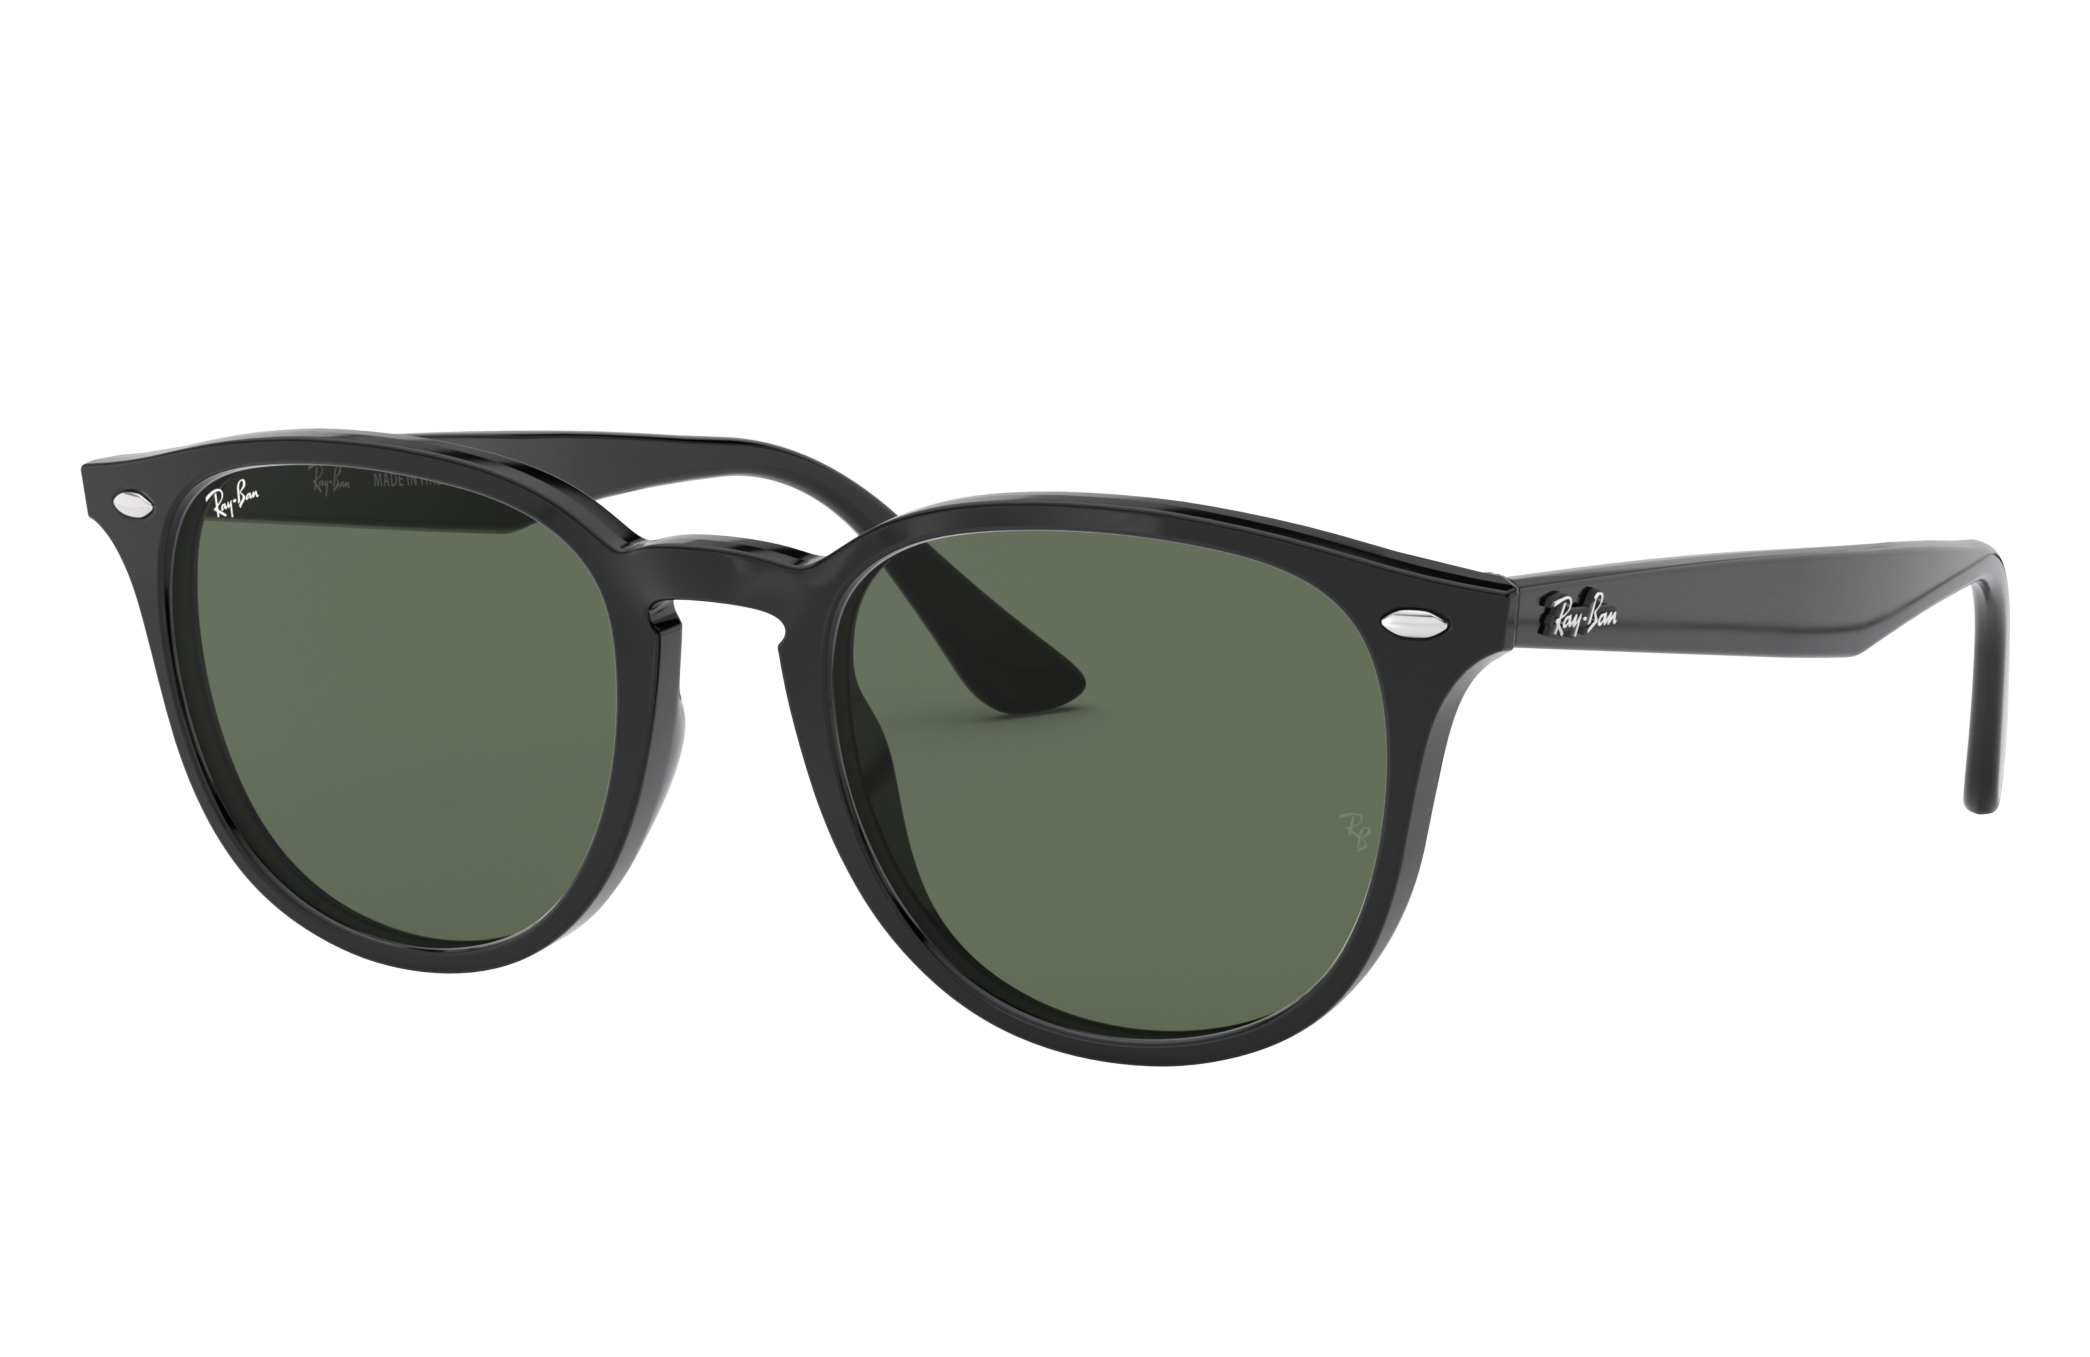 Check out the Rb4259 at ray-ban.com